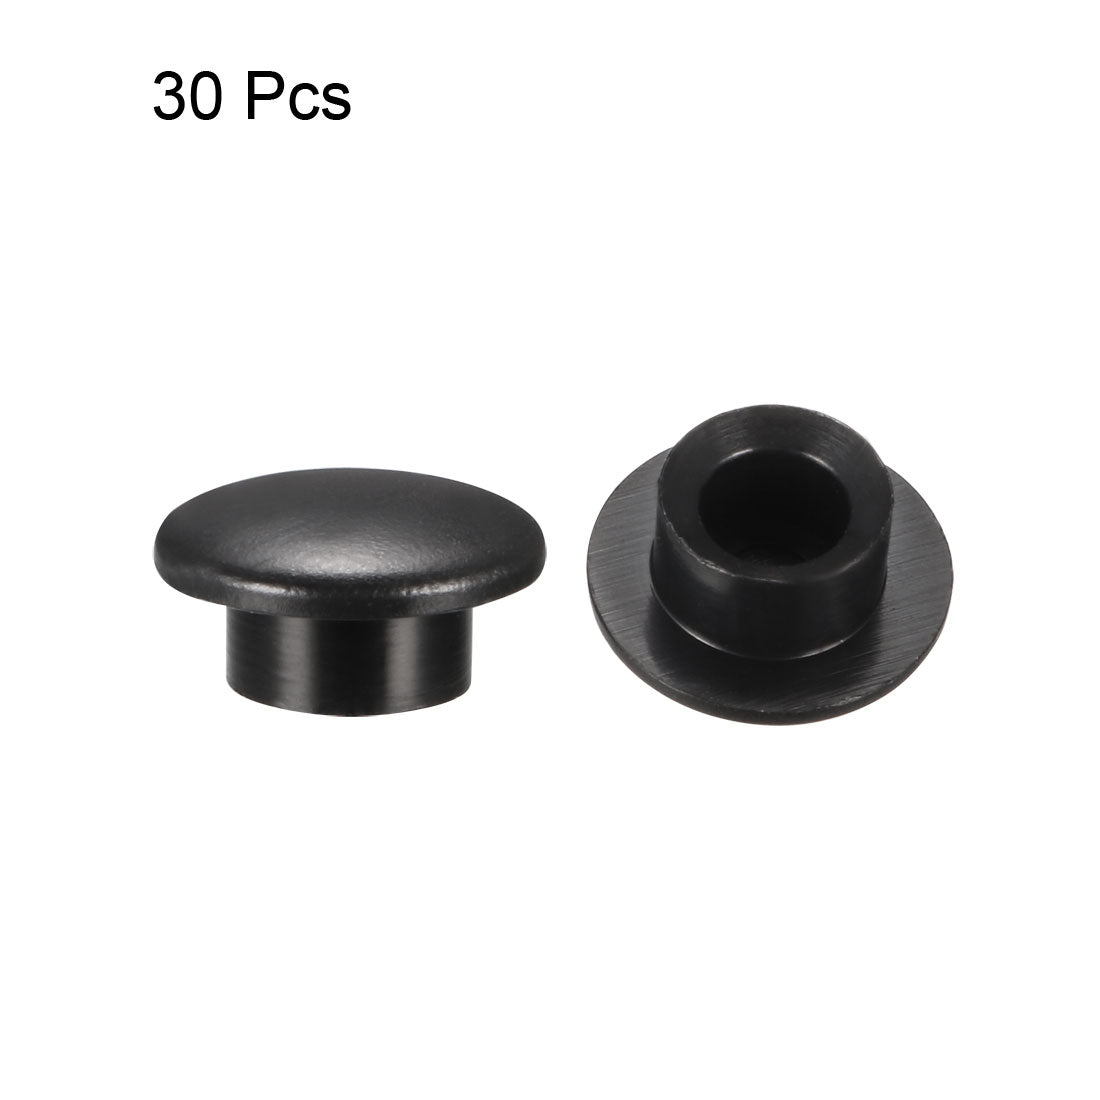 uxcell Uxcell 30Pcs 3.2mm Hole Dia Plastic Push Button Tactile Switch Caps Cover Keycaps Protector Black for 6x6 Micro Switch